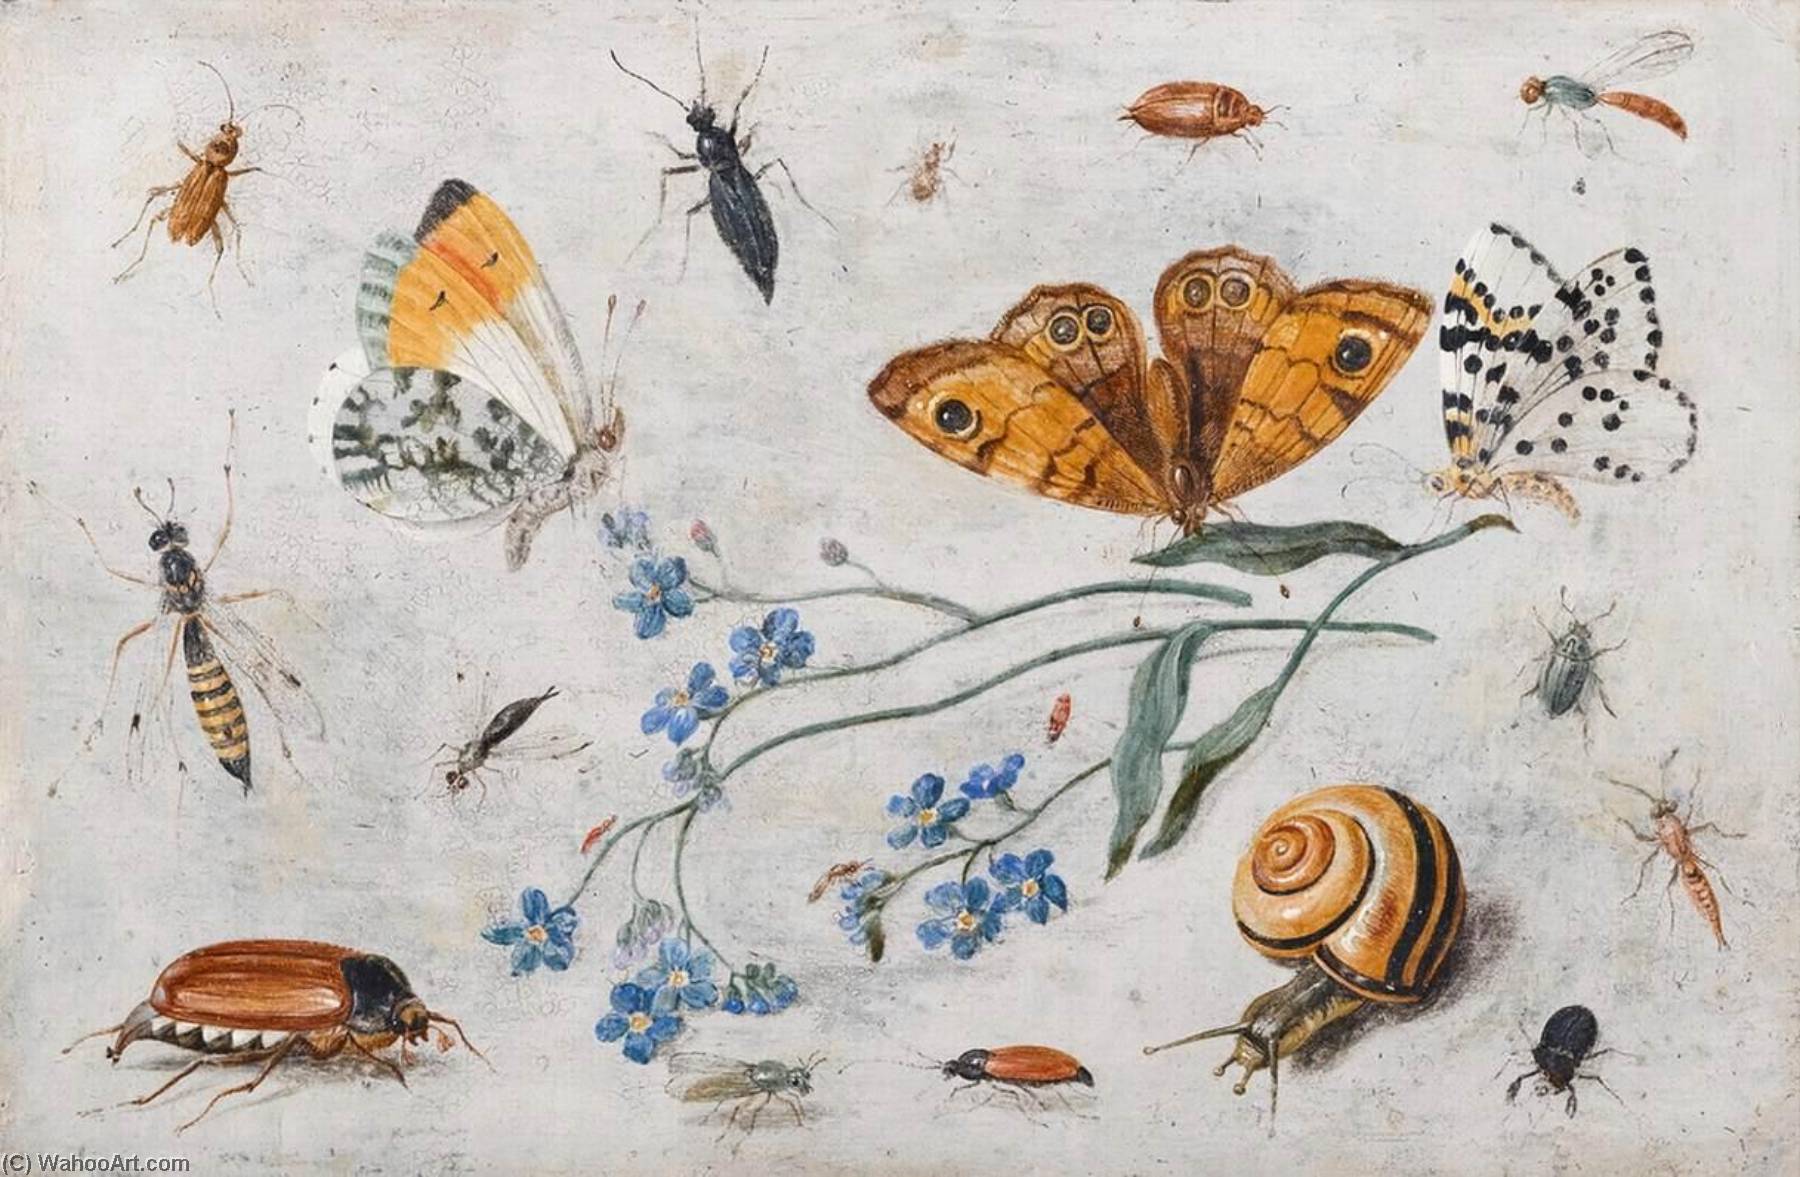 Order Art Reproductions Study of Insects, Butterflies and a Snail with a Sprig of Forget Me Nots, 1659 by Jan Van Kessel The Elder (1626-1679) | ArtsDot.com